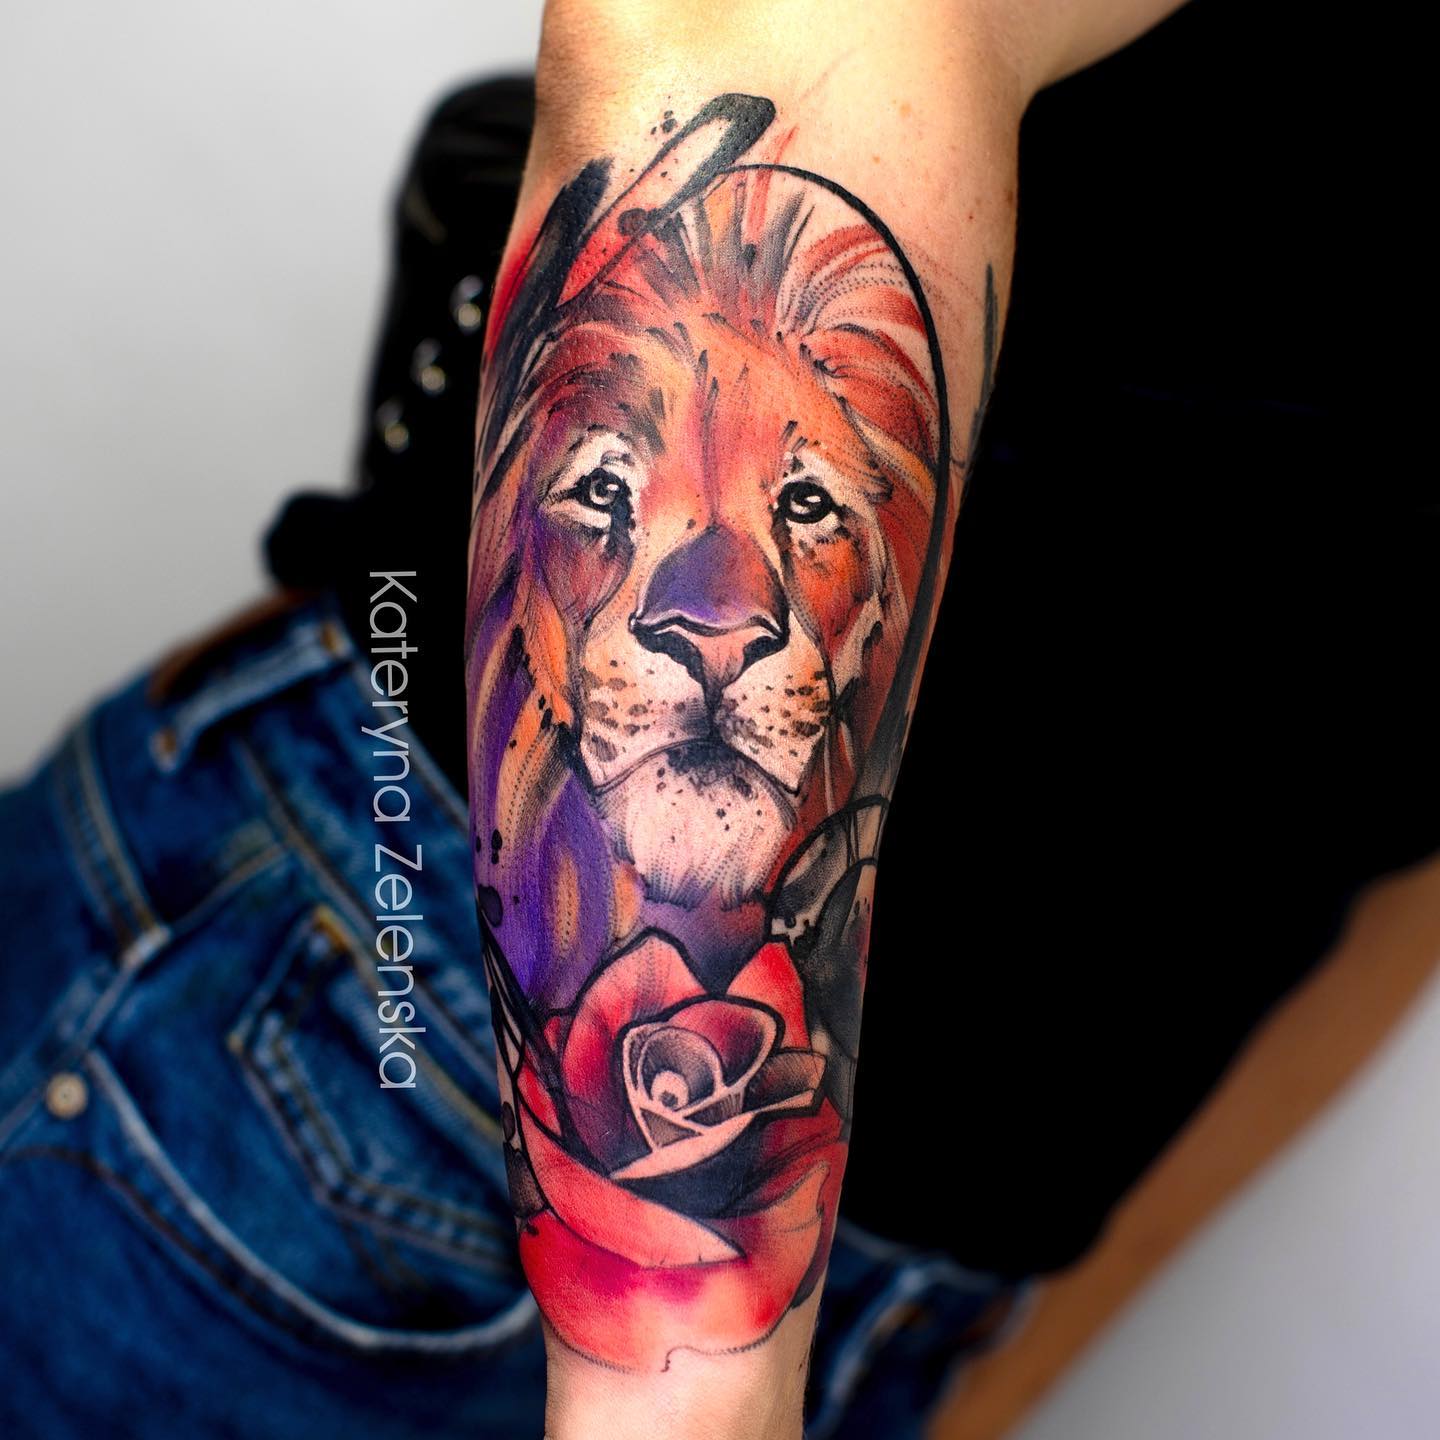  A competent tattooist can turn your arm into an art piece with this colourful lion.